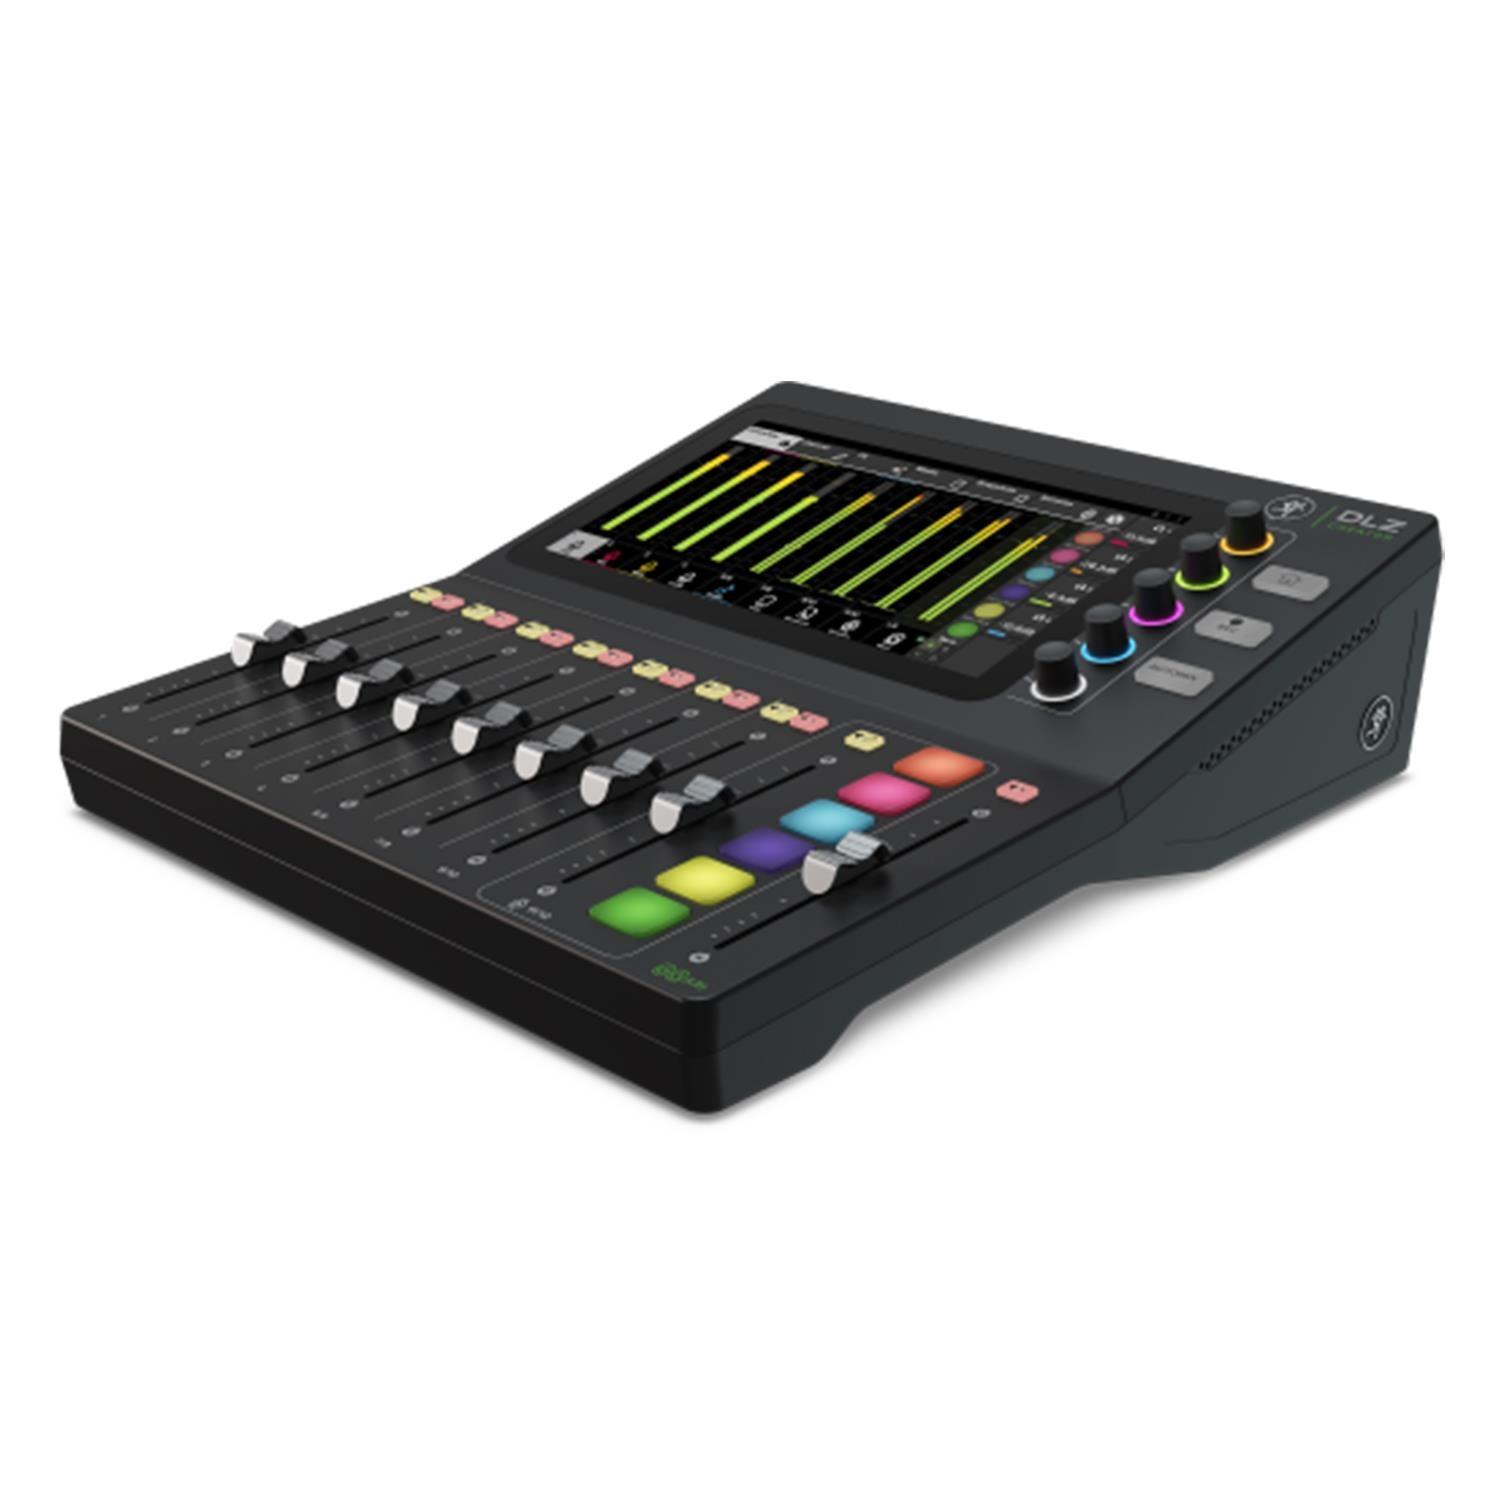 Mackie DLZ Creator Adaptive Digital Mixer for Podcasting and Streaming - DY Pro Audio